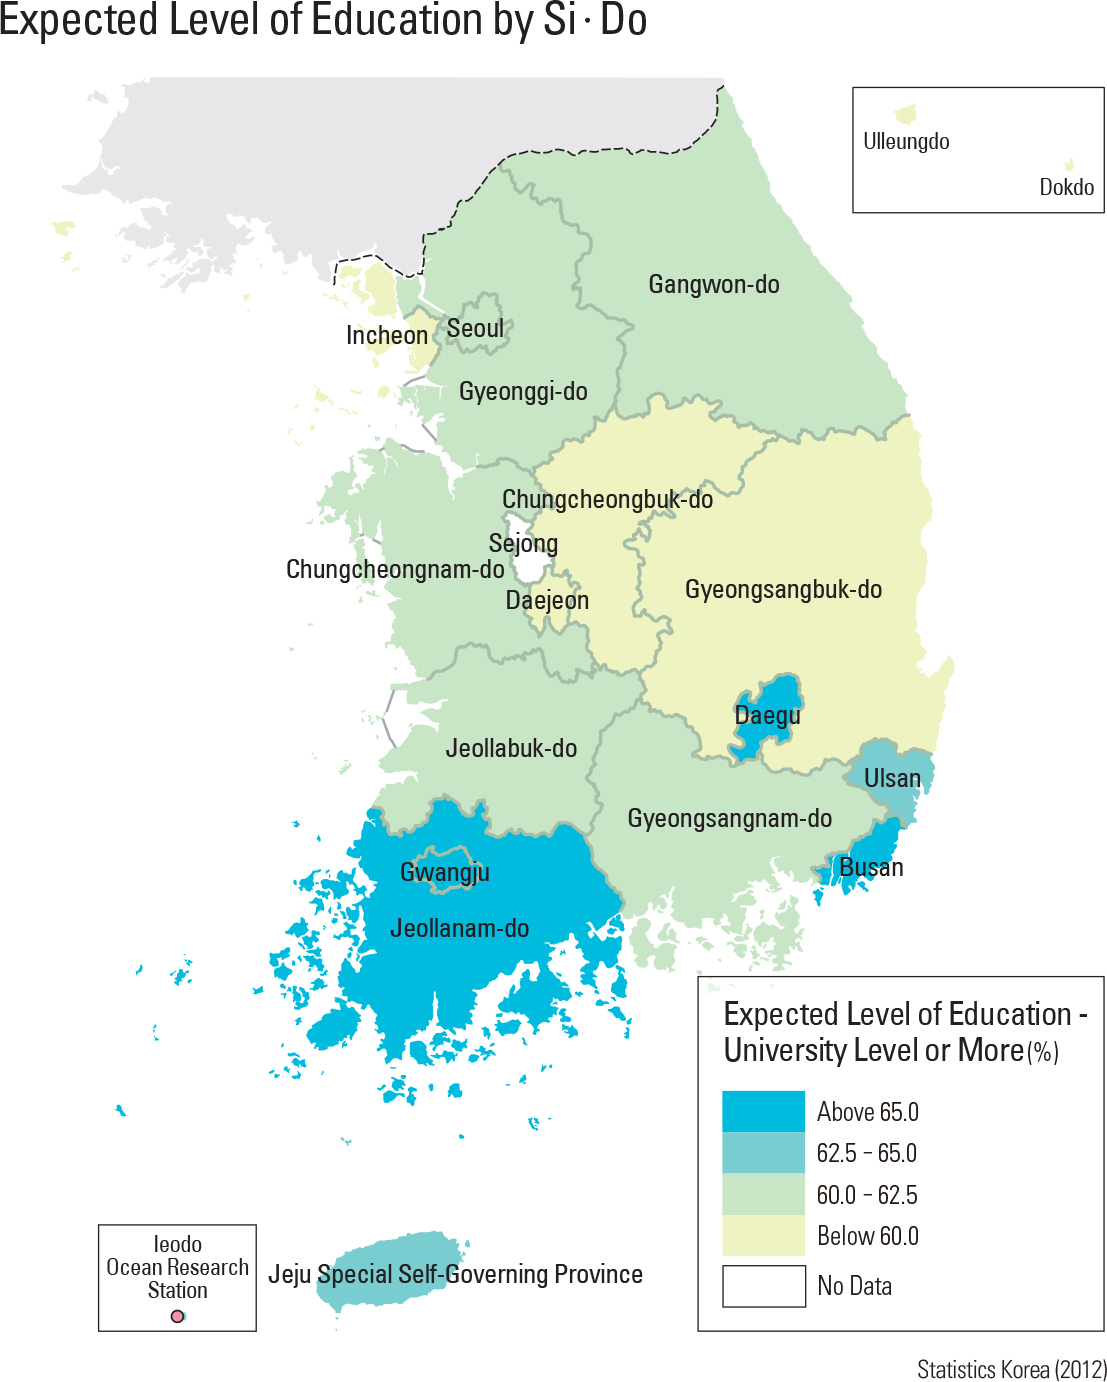  Expected Level of Education by Si·Do